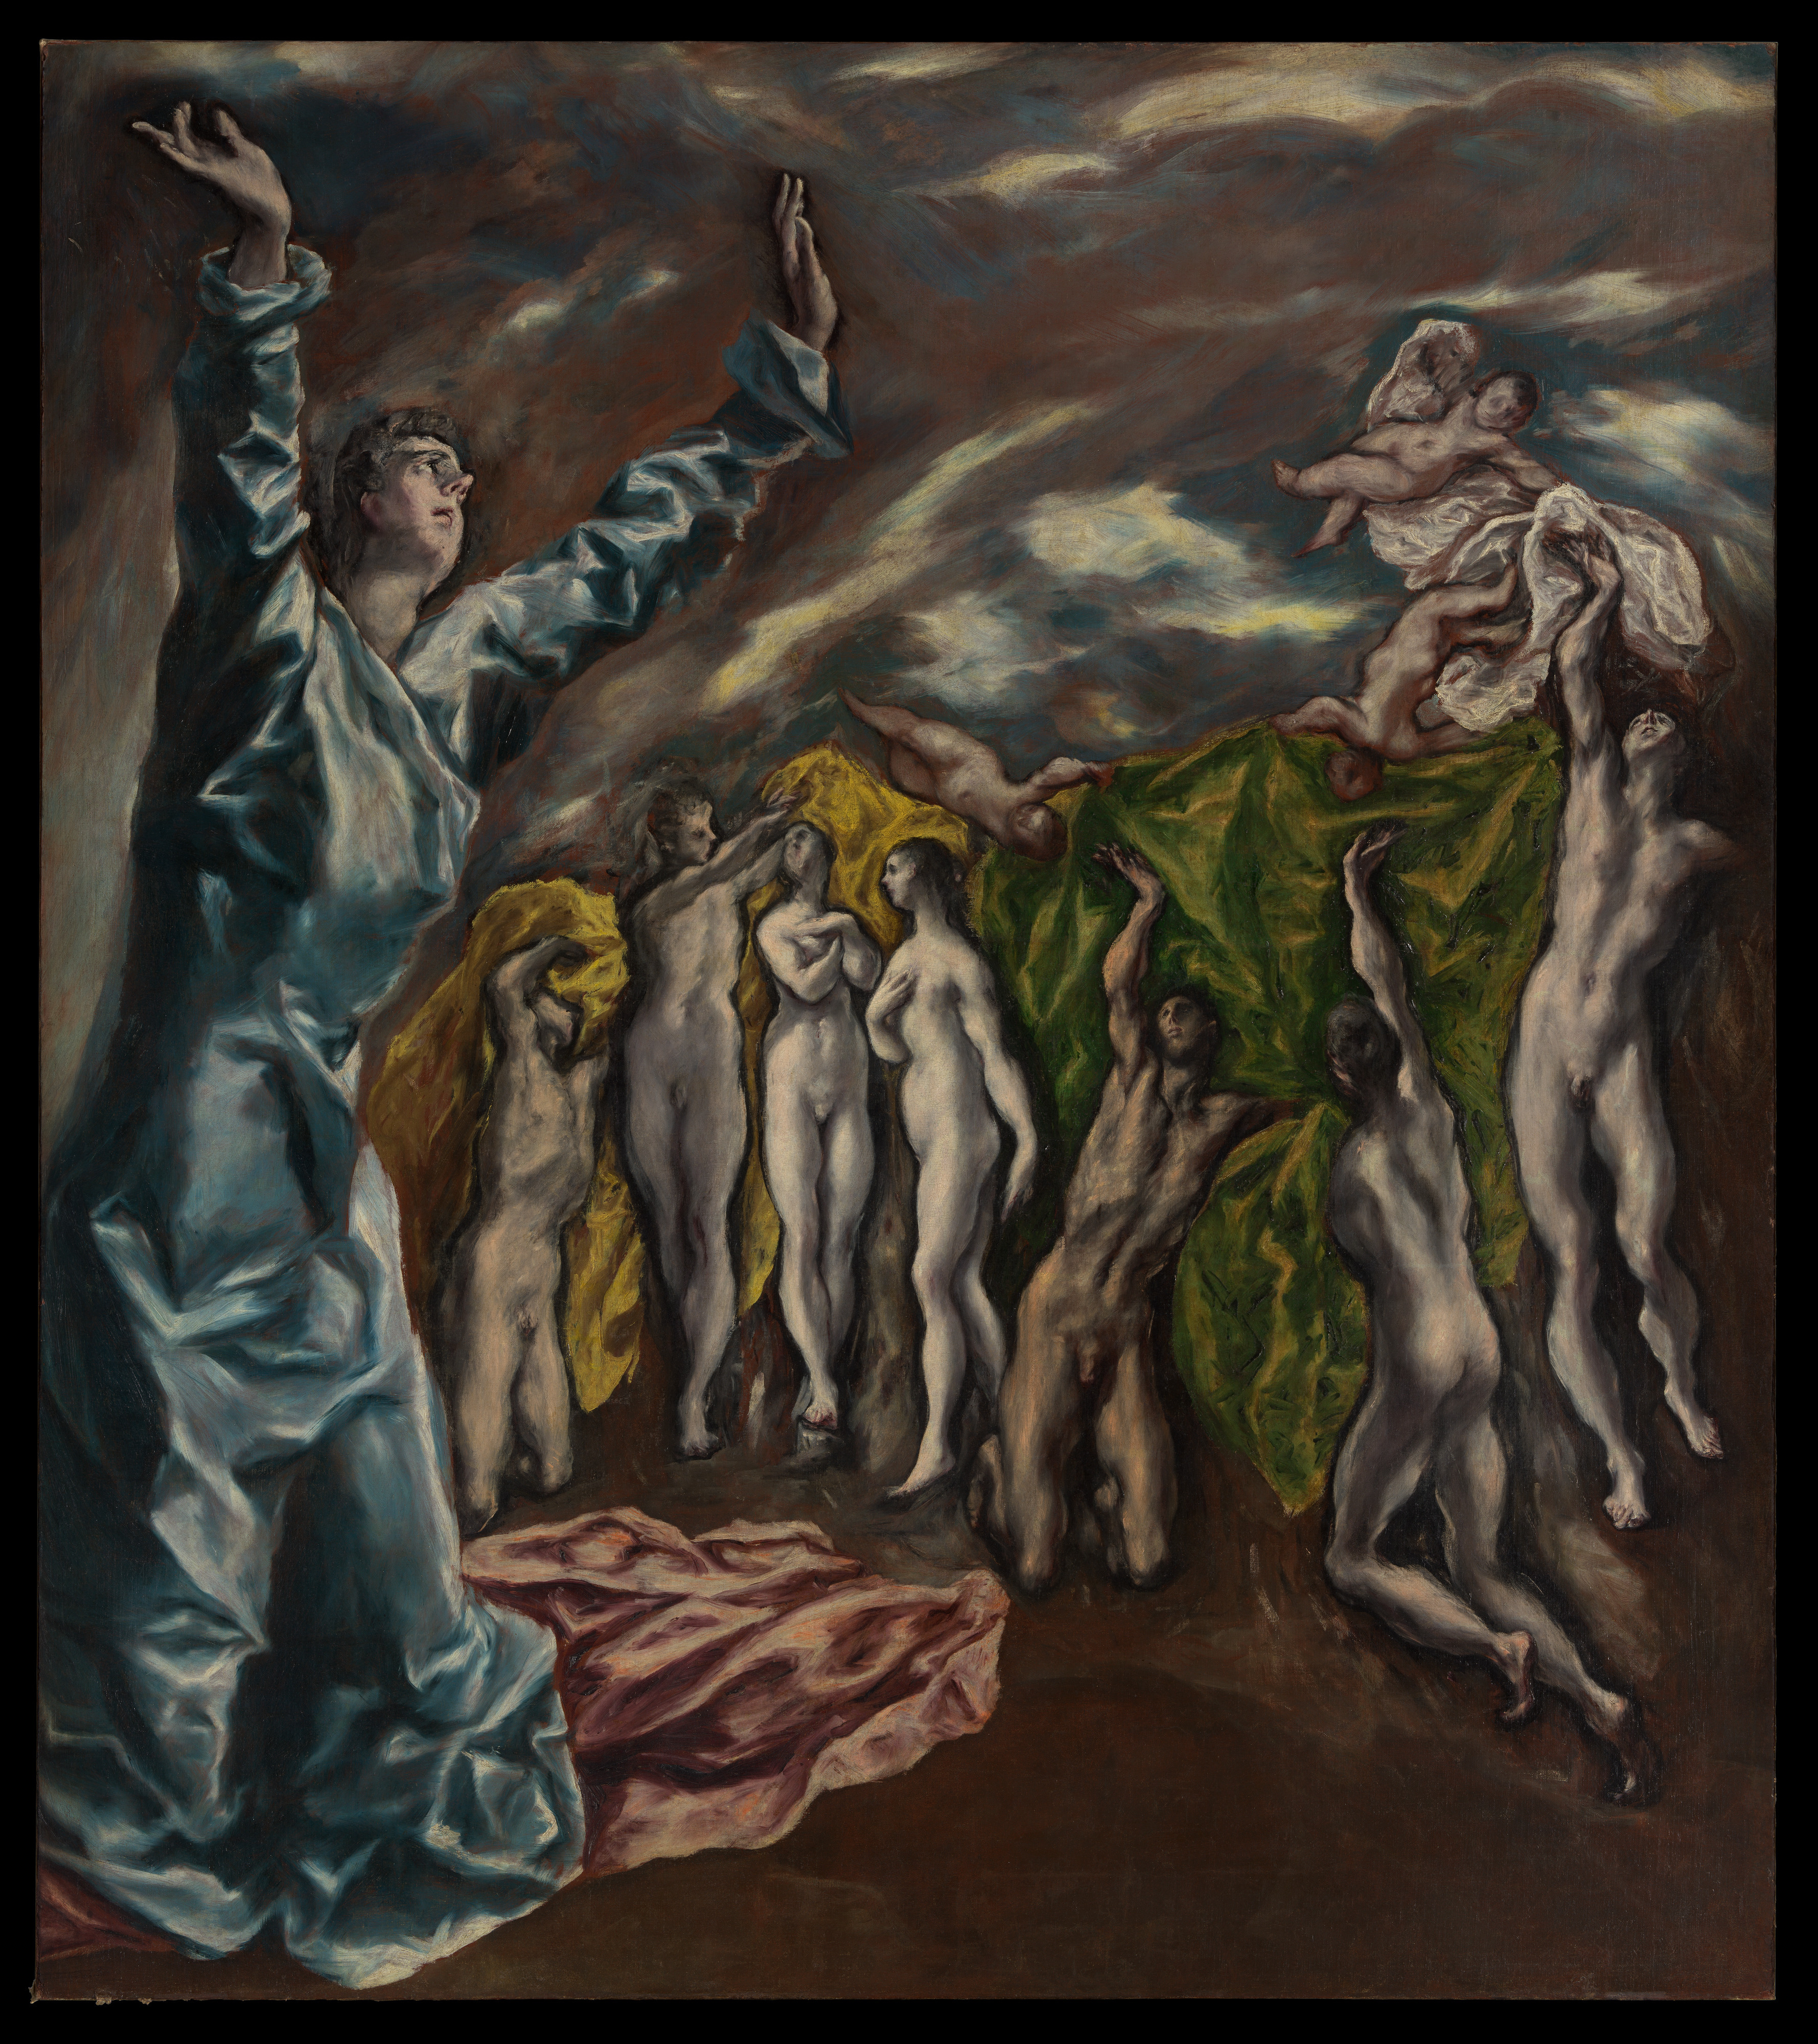 JESUS CHRIST HEALING THE BLIND MAN PAINTING EL GRECO BIBLE ART REAL CANVAS PRINT 